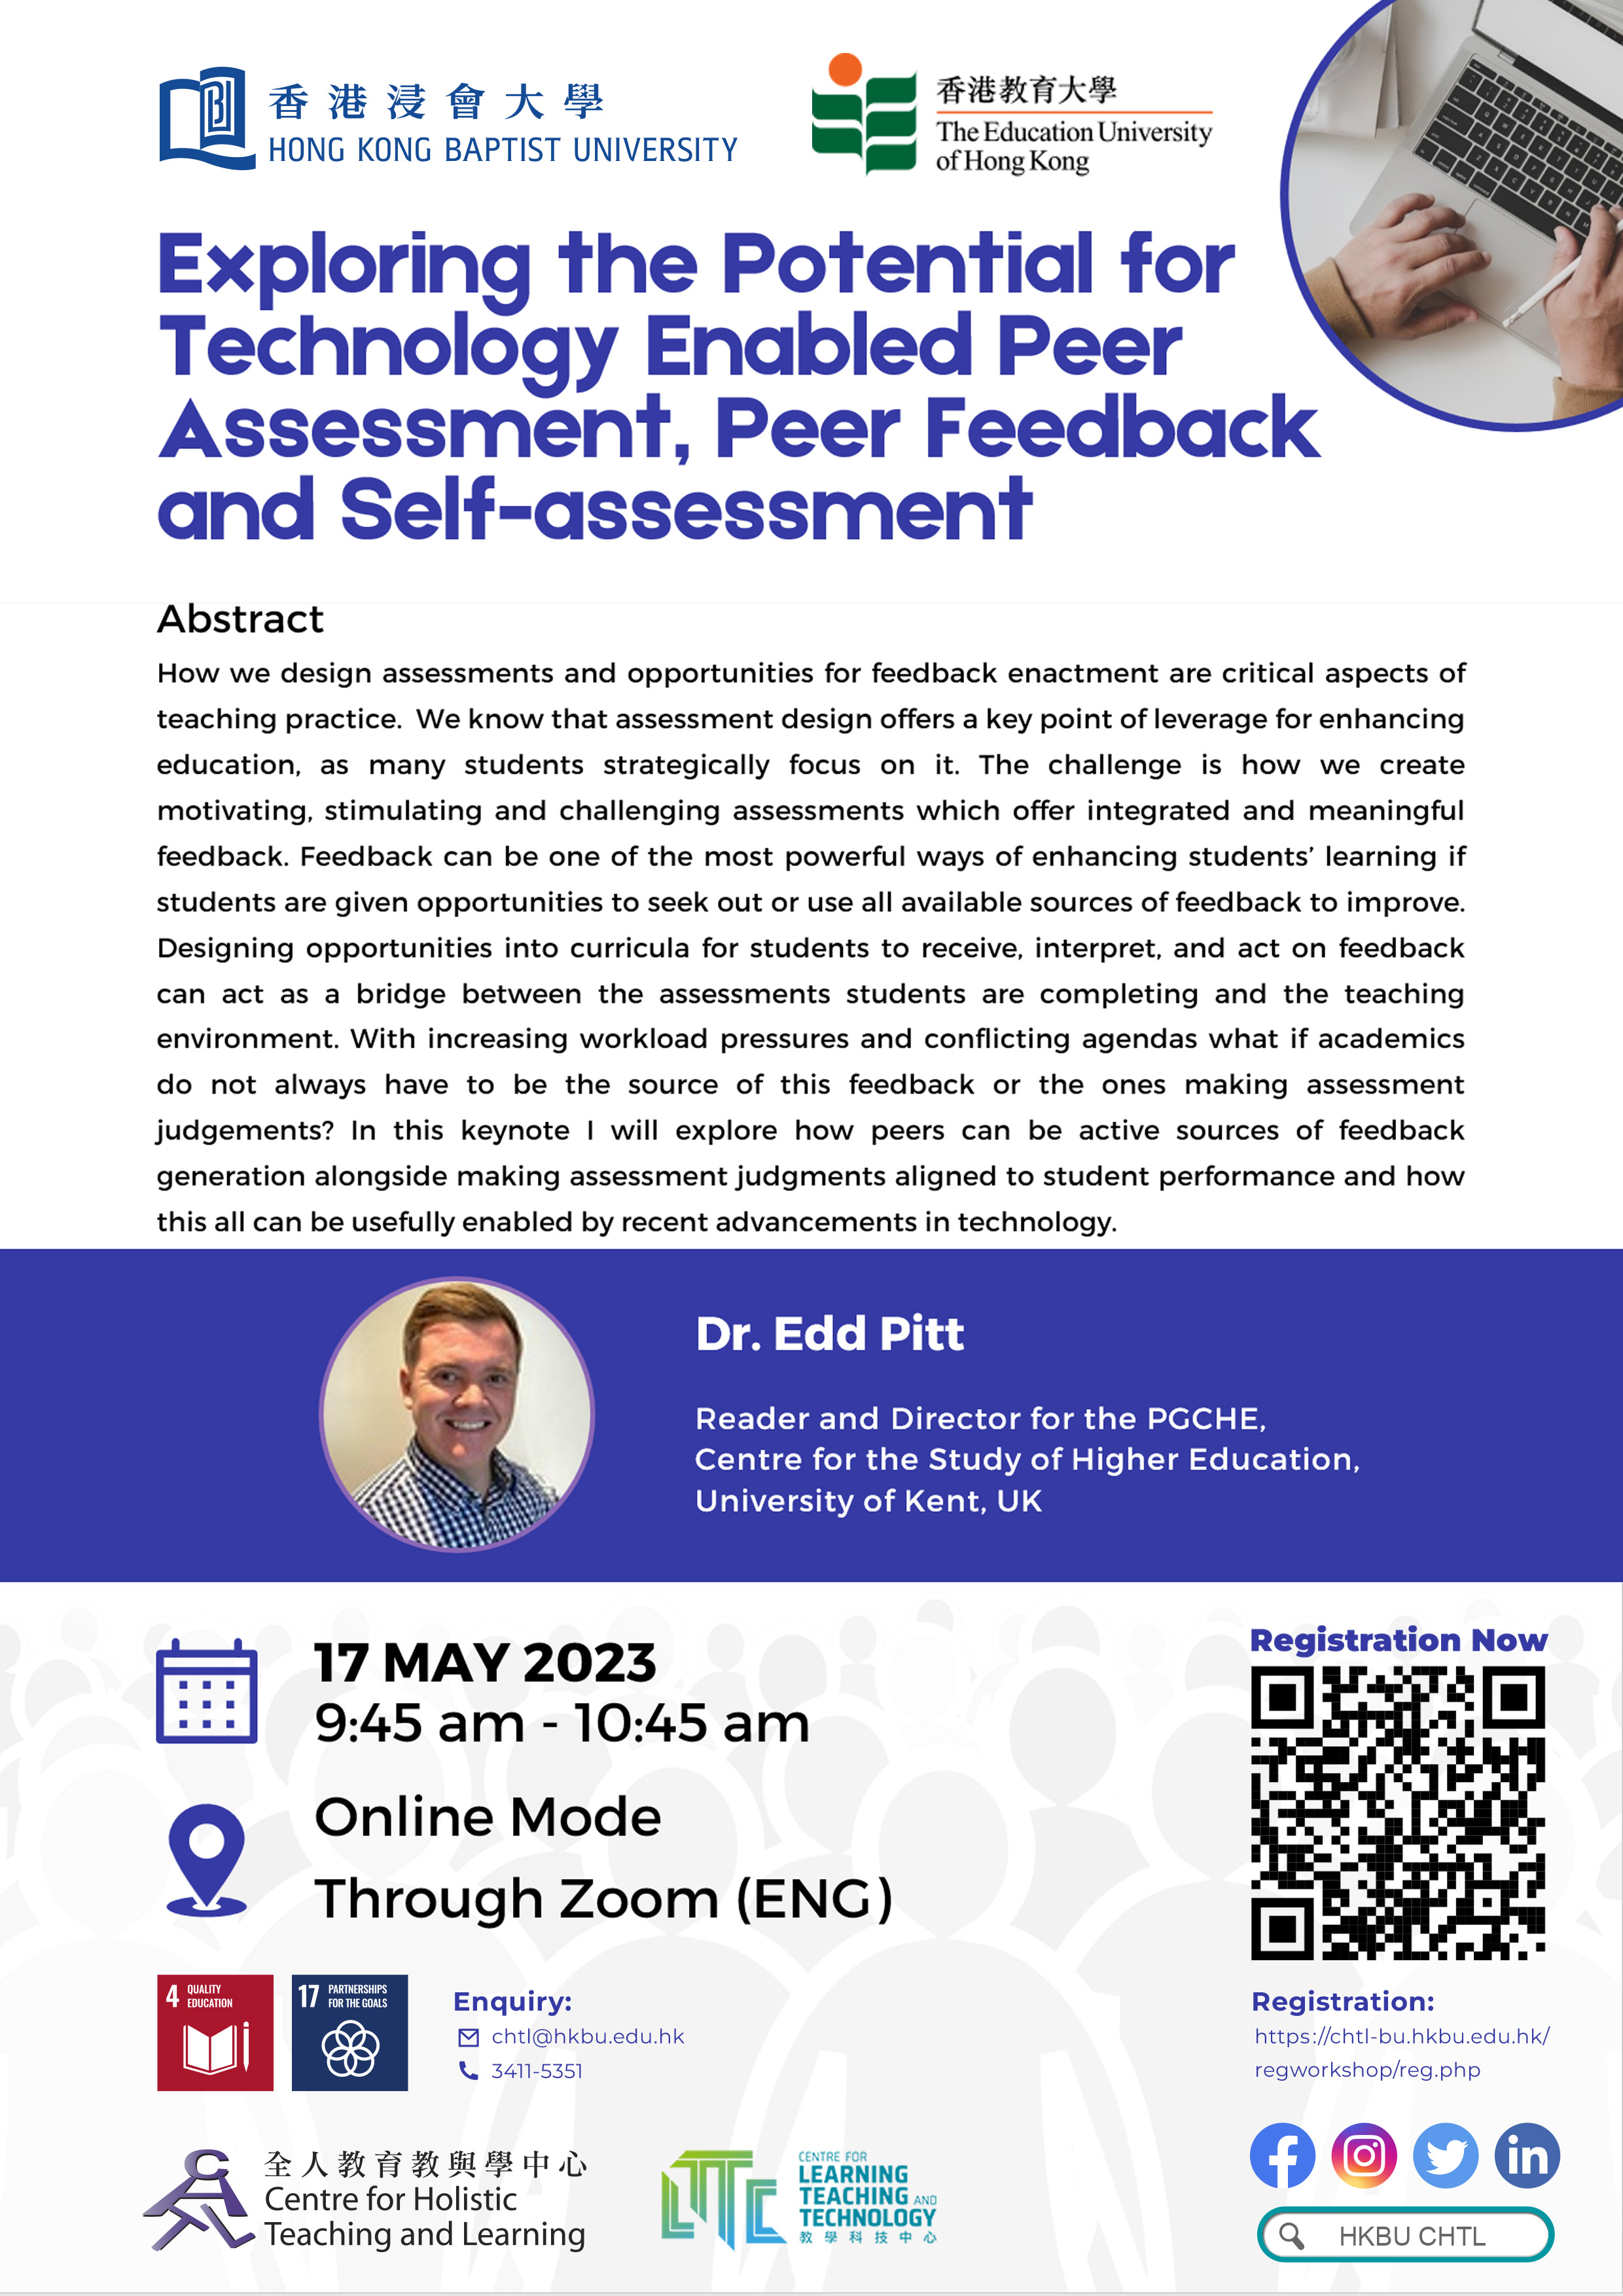 Exploring the Potential for Technology Enabled Peer Assessment, Peer Feedback and Self-assessment